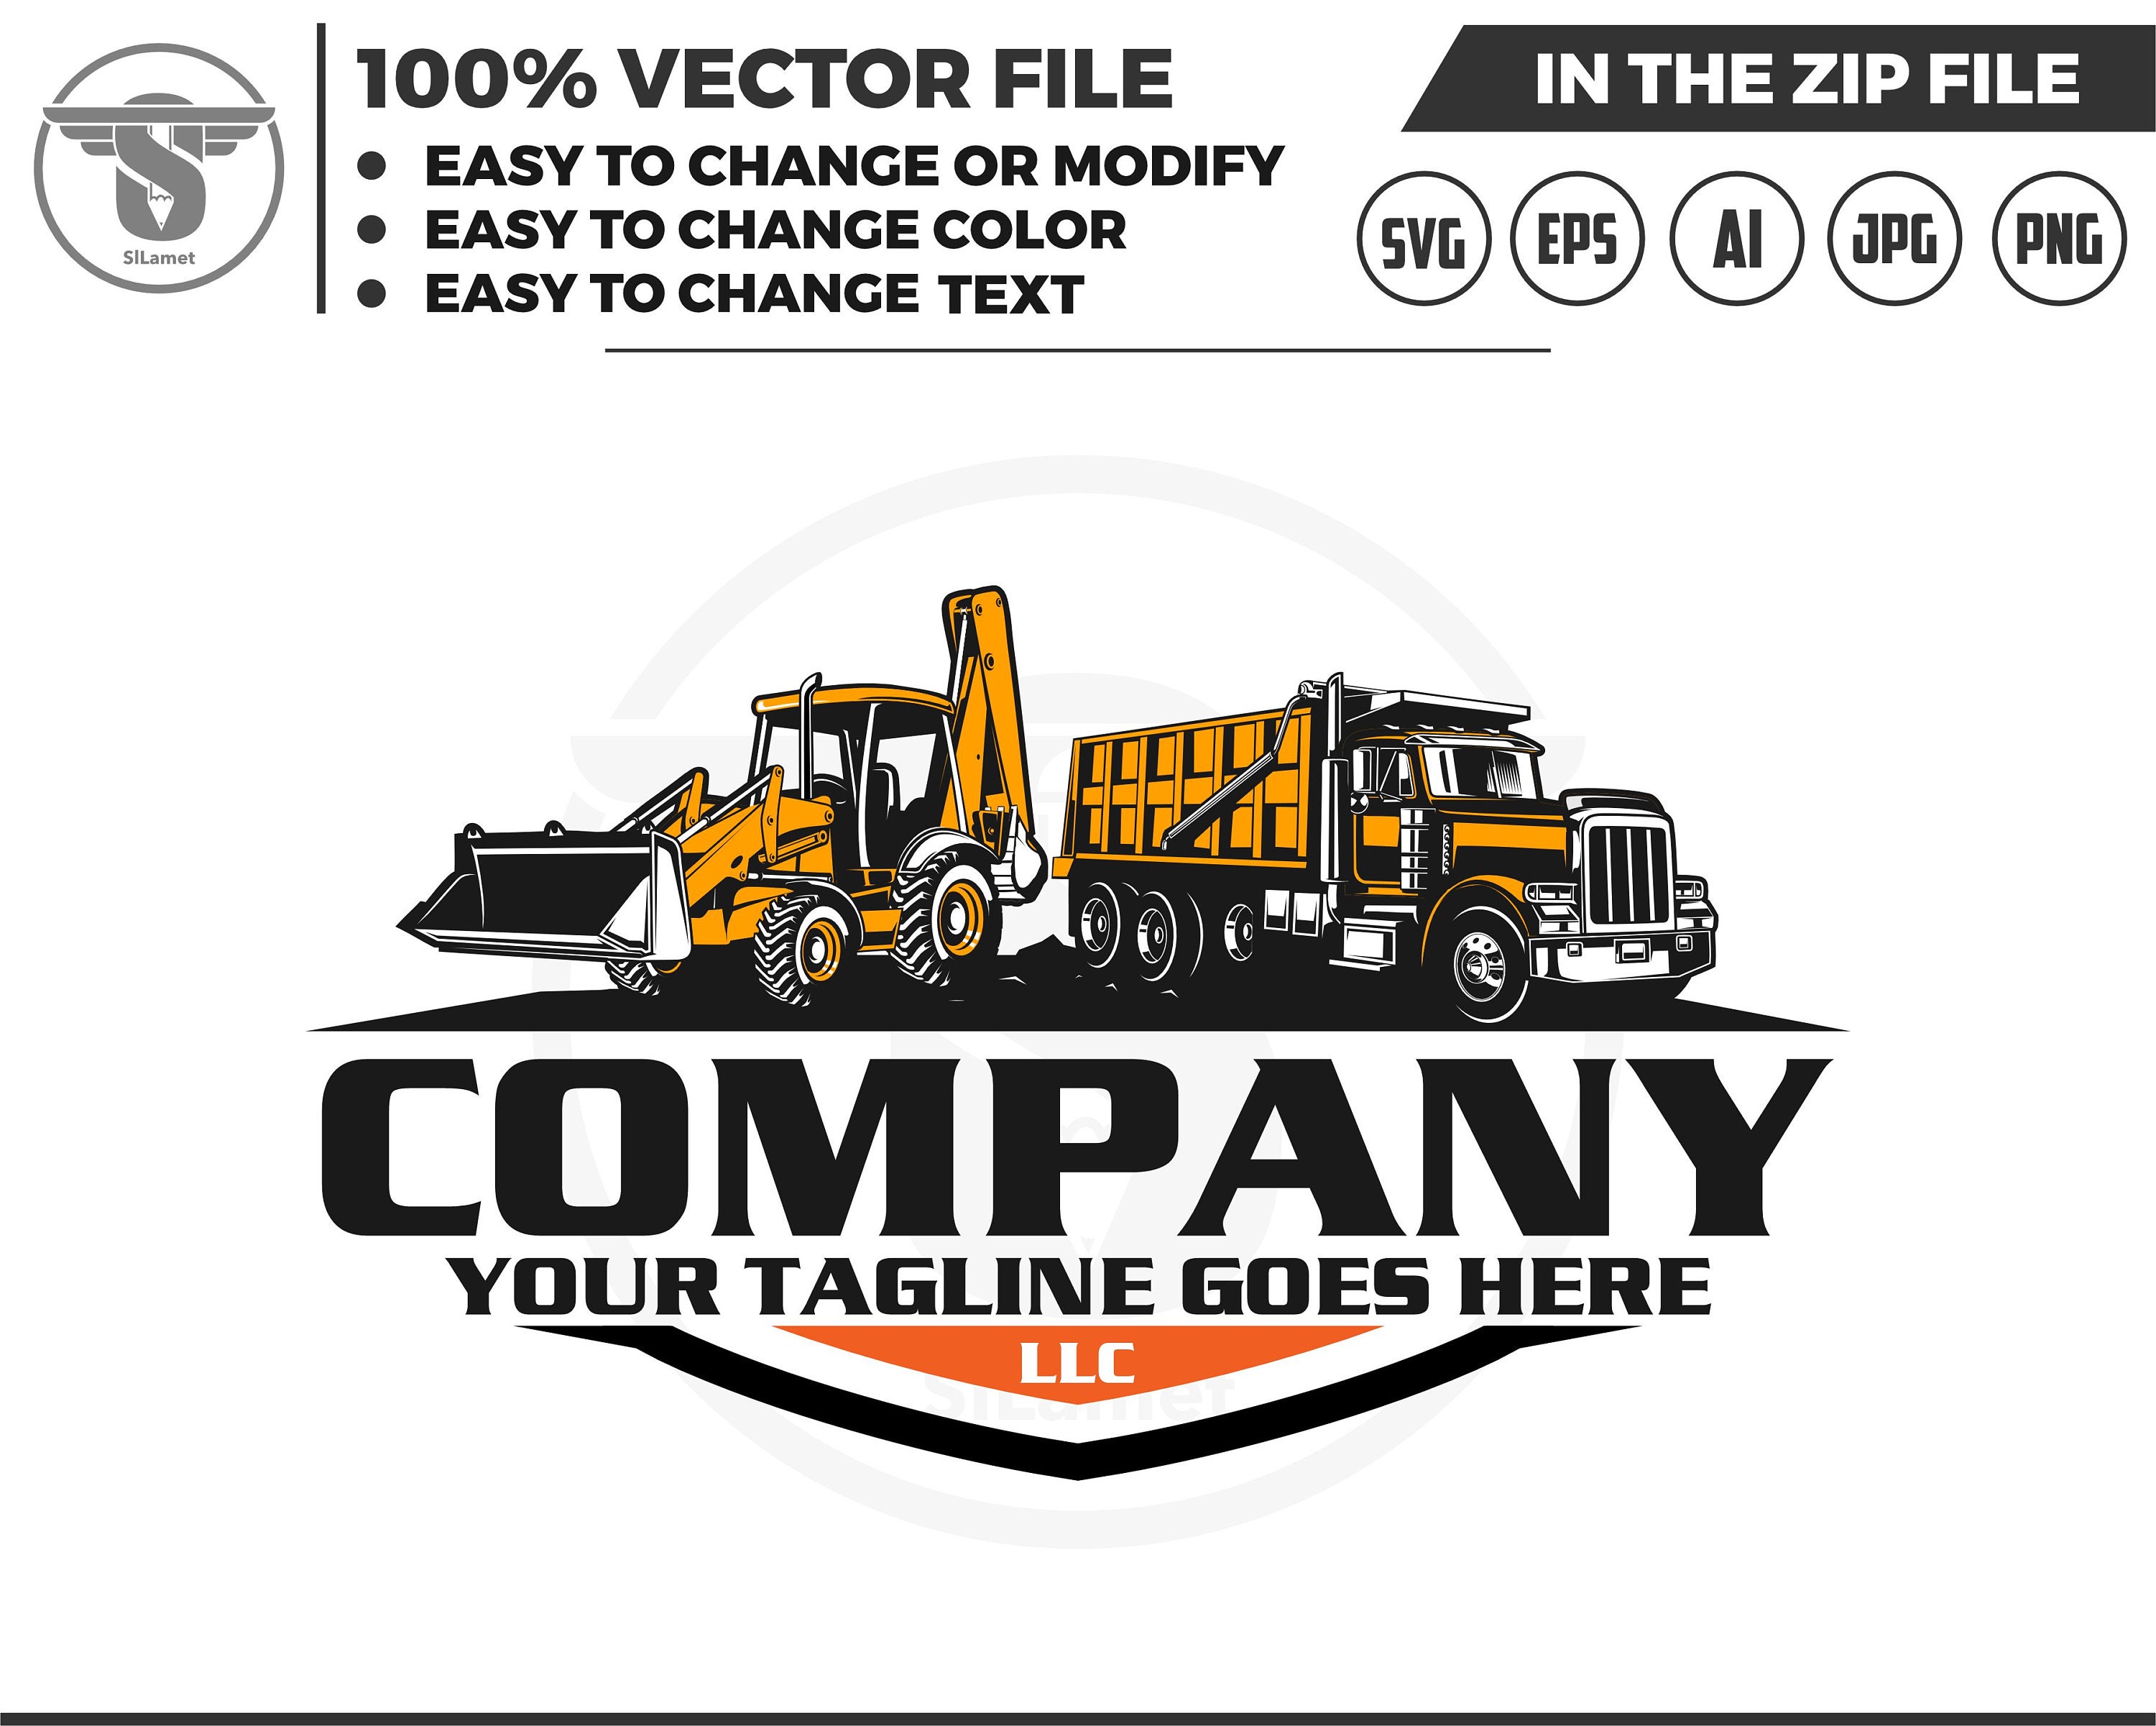 Construction Trucks Pattern - Excavator, Dump Truck, Backhoe and more.  Wrapping Paper by iDove Design